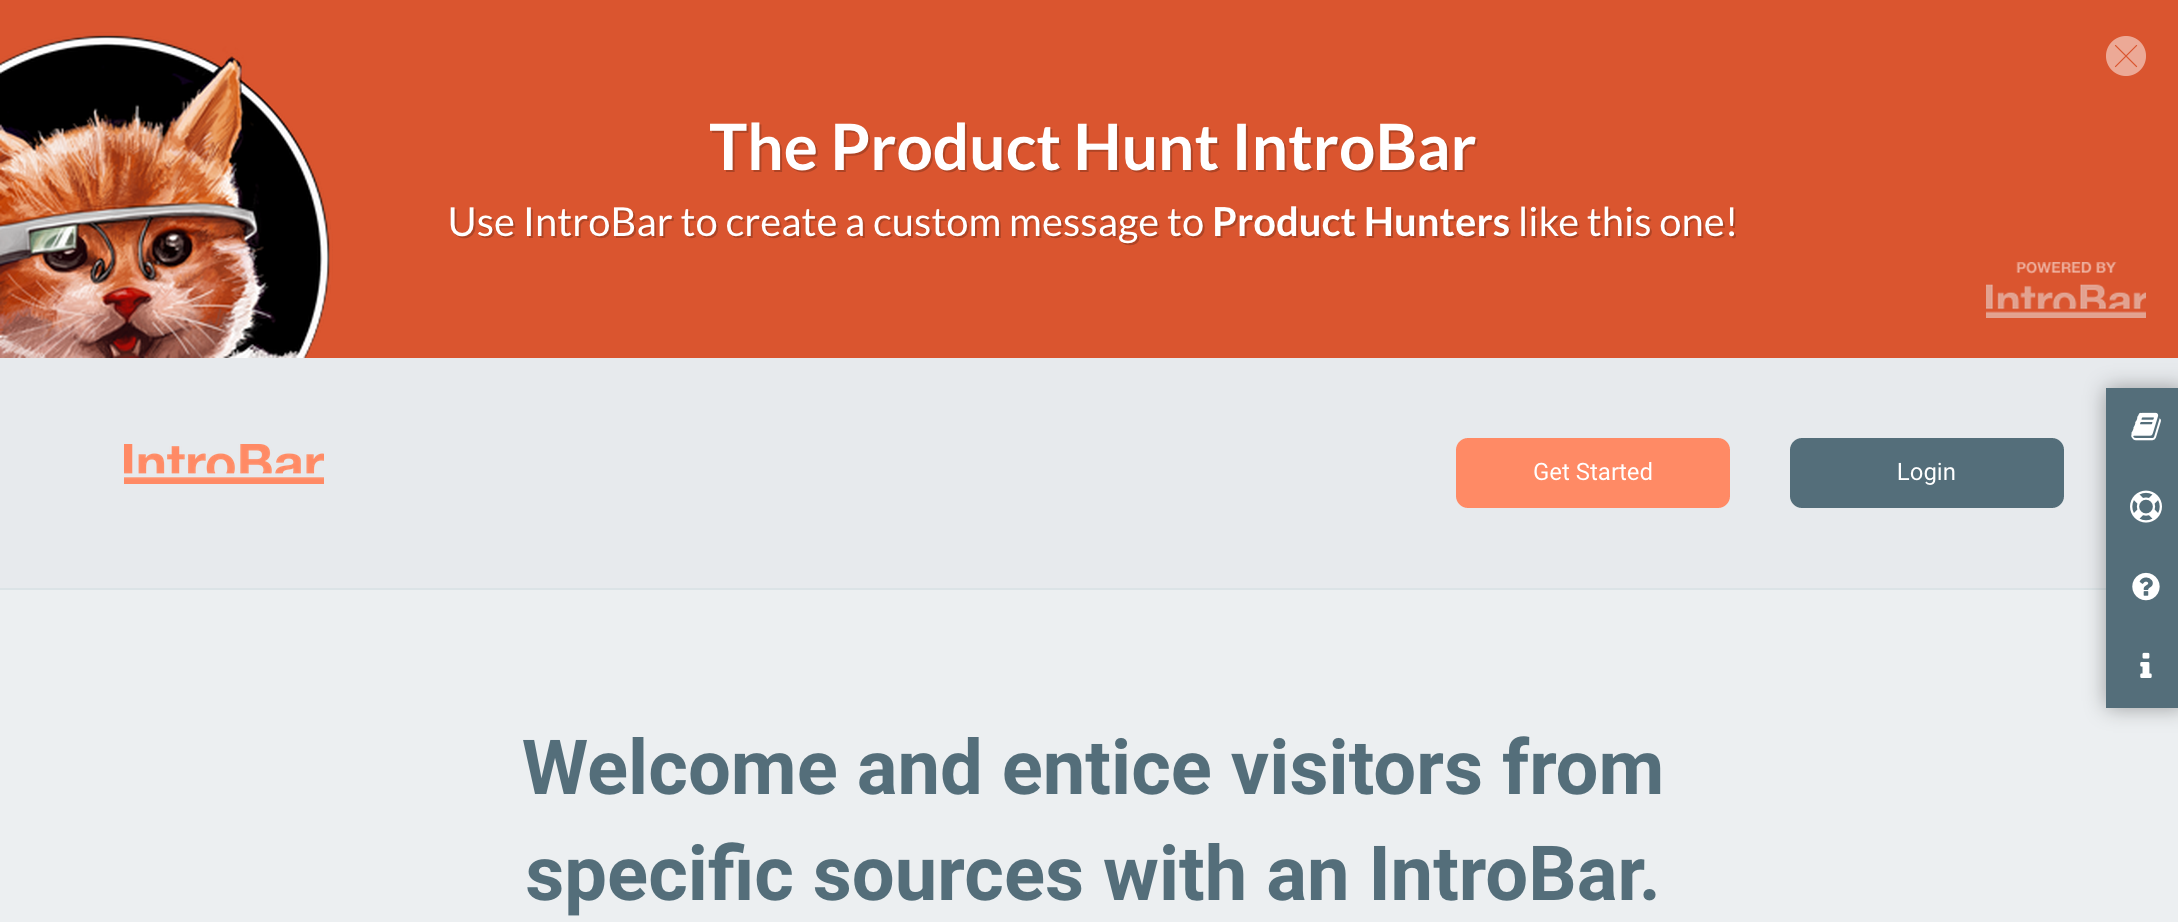 Offer something special for Hunters with IntroBar